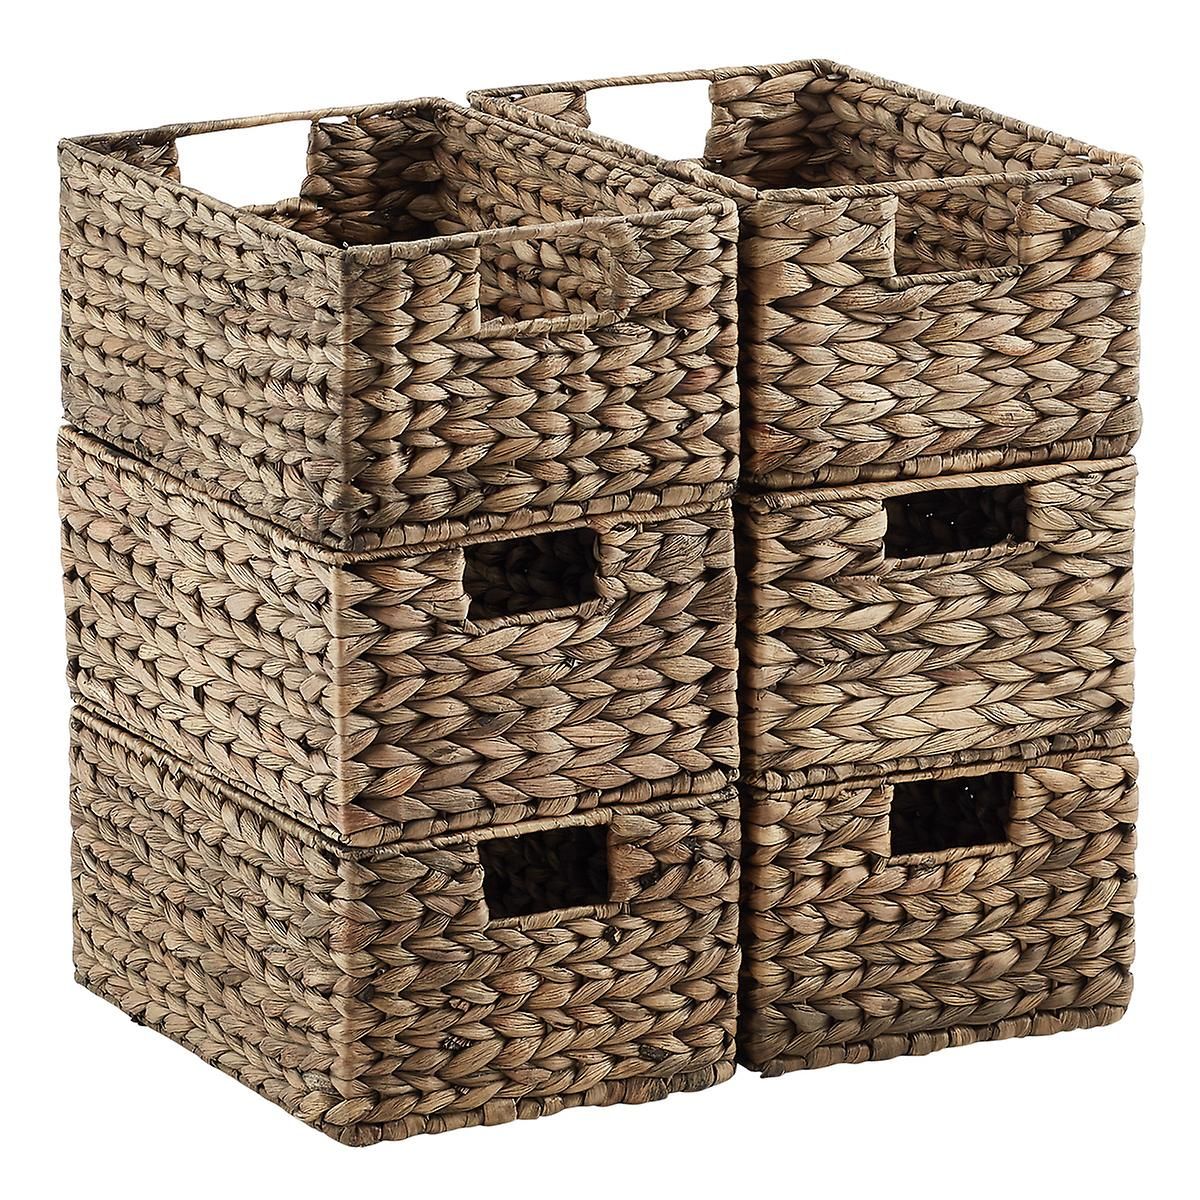 Cases of Mocha Water Hyacinth Storage Bins with Handles | The Container Store